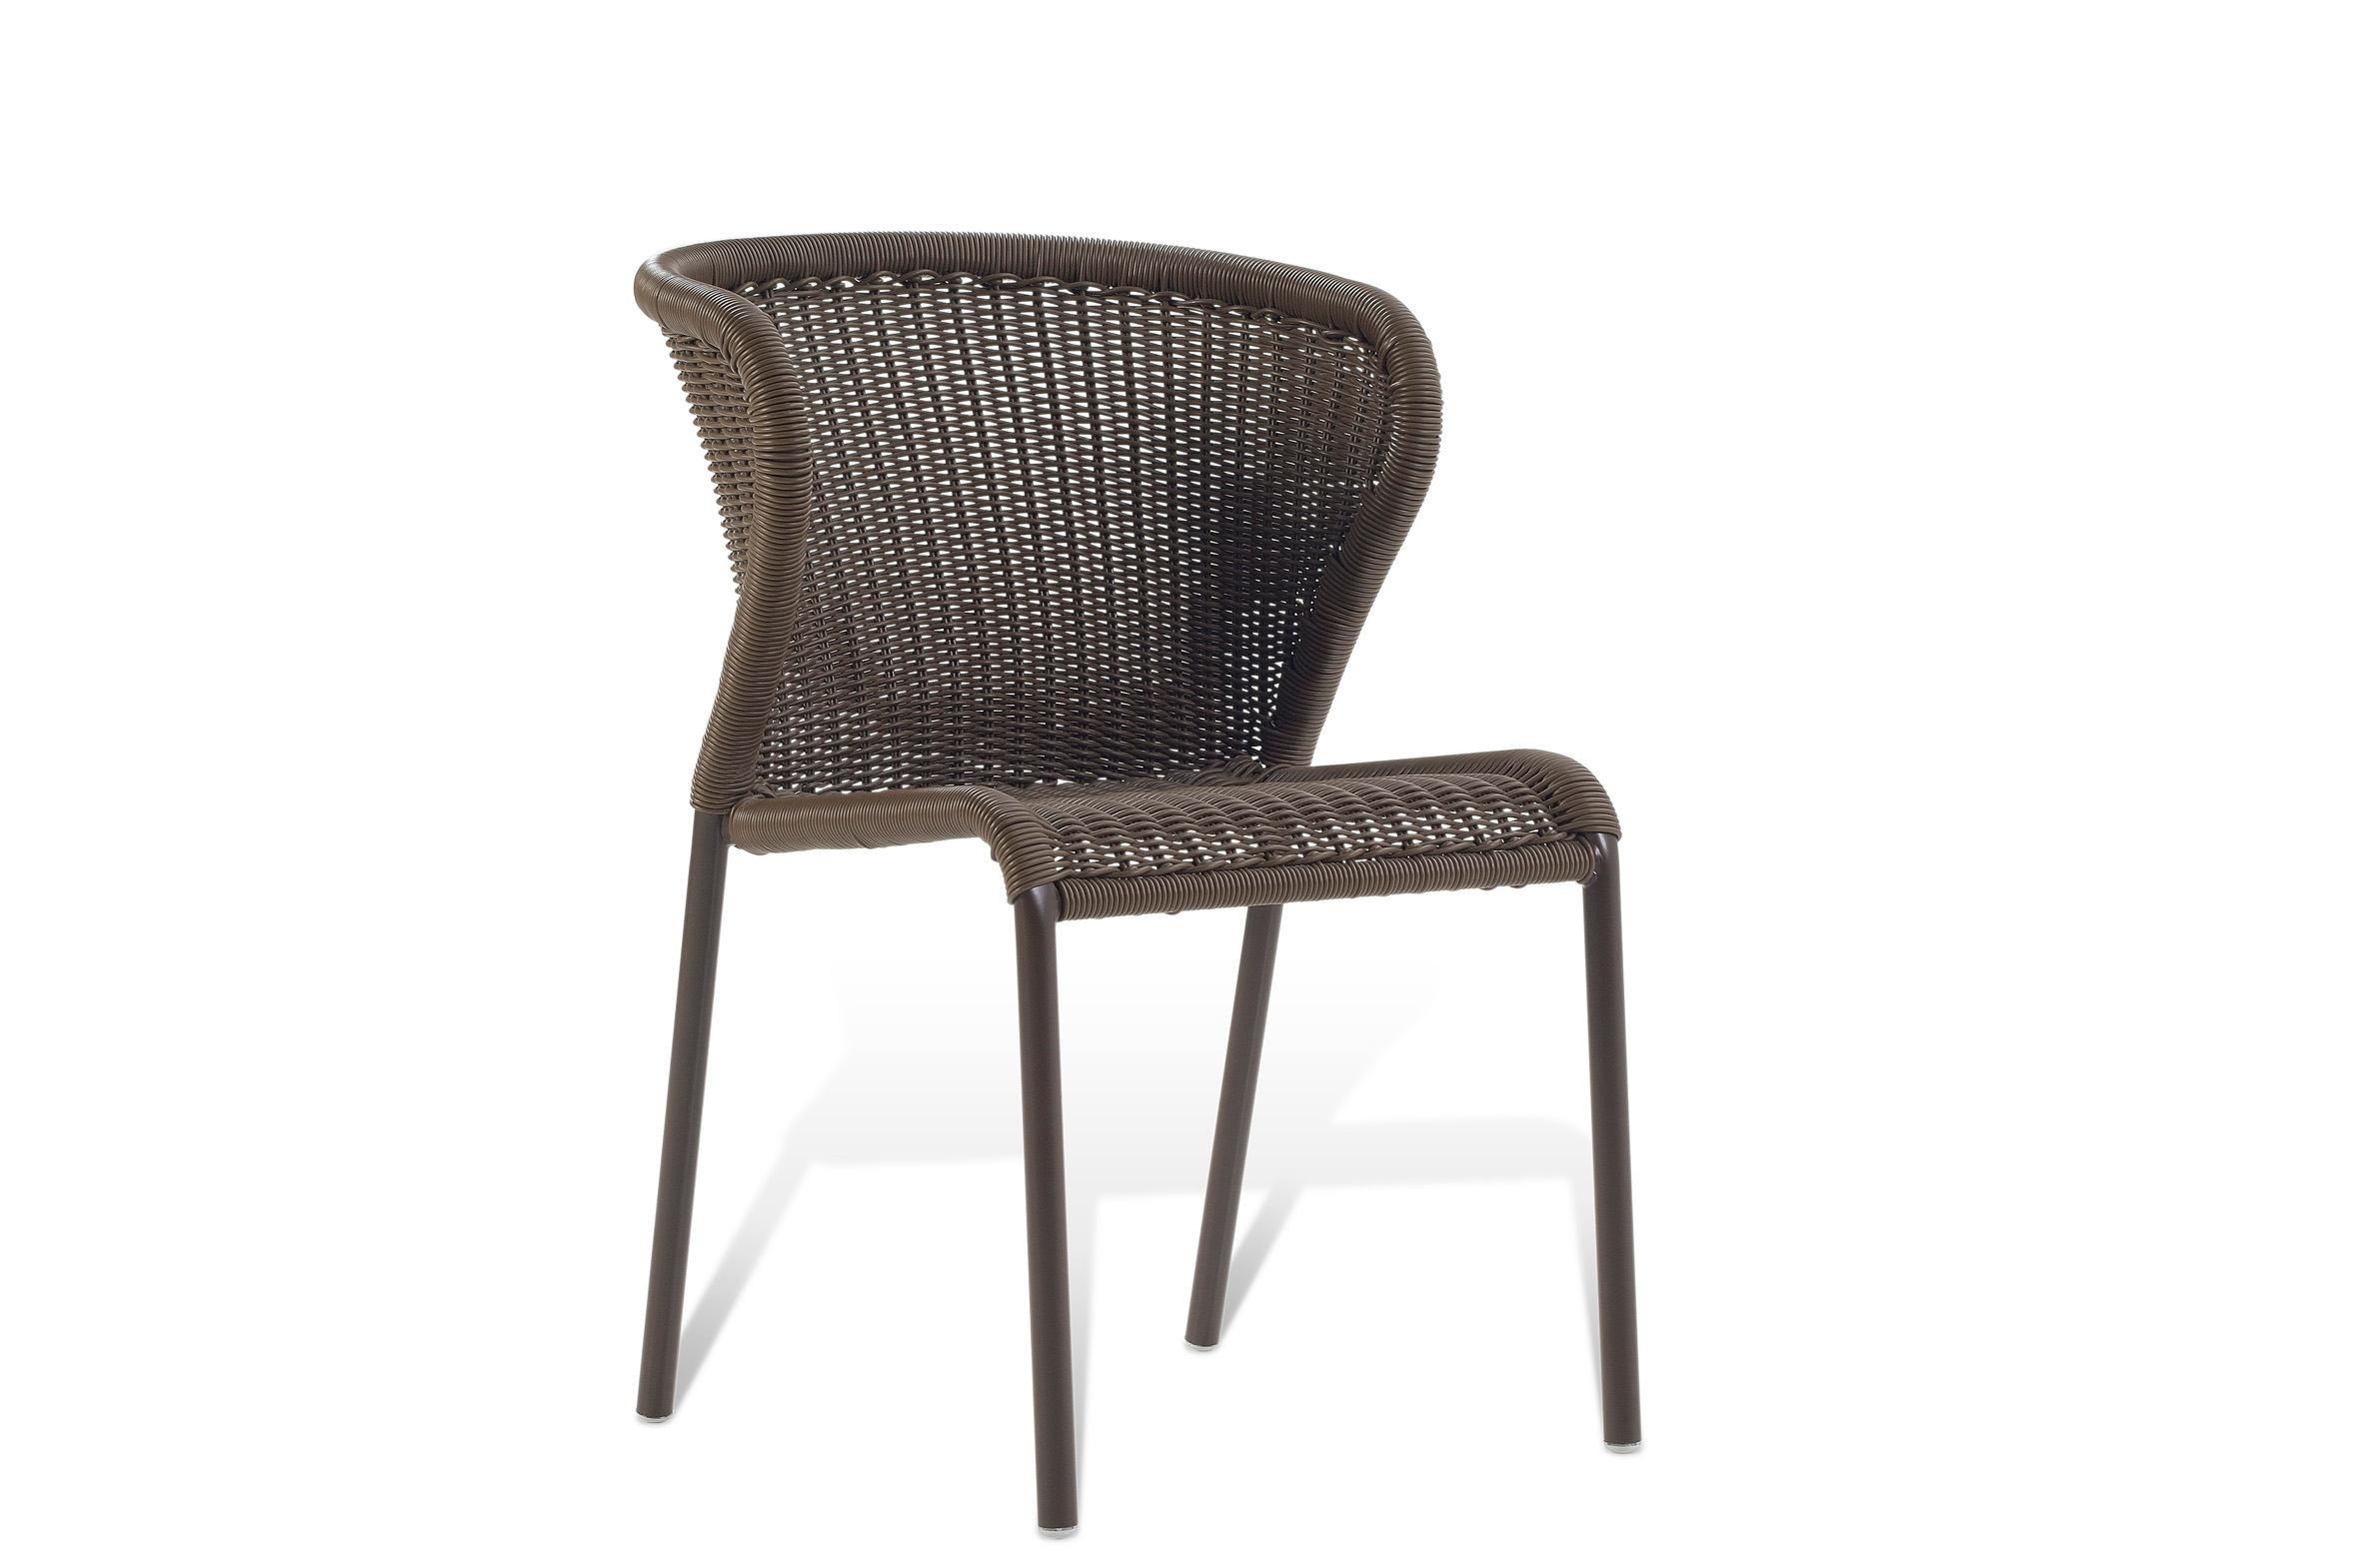 ANDROS CHAIR SINTETHYC WEAVE